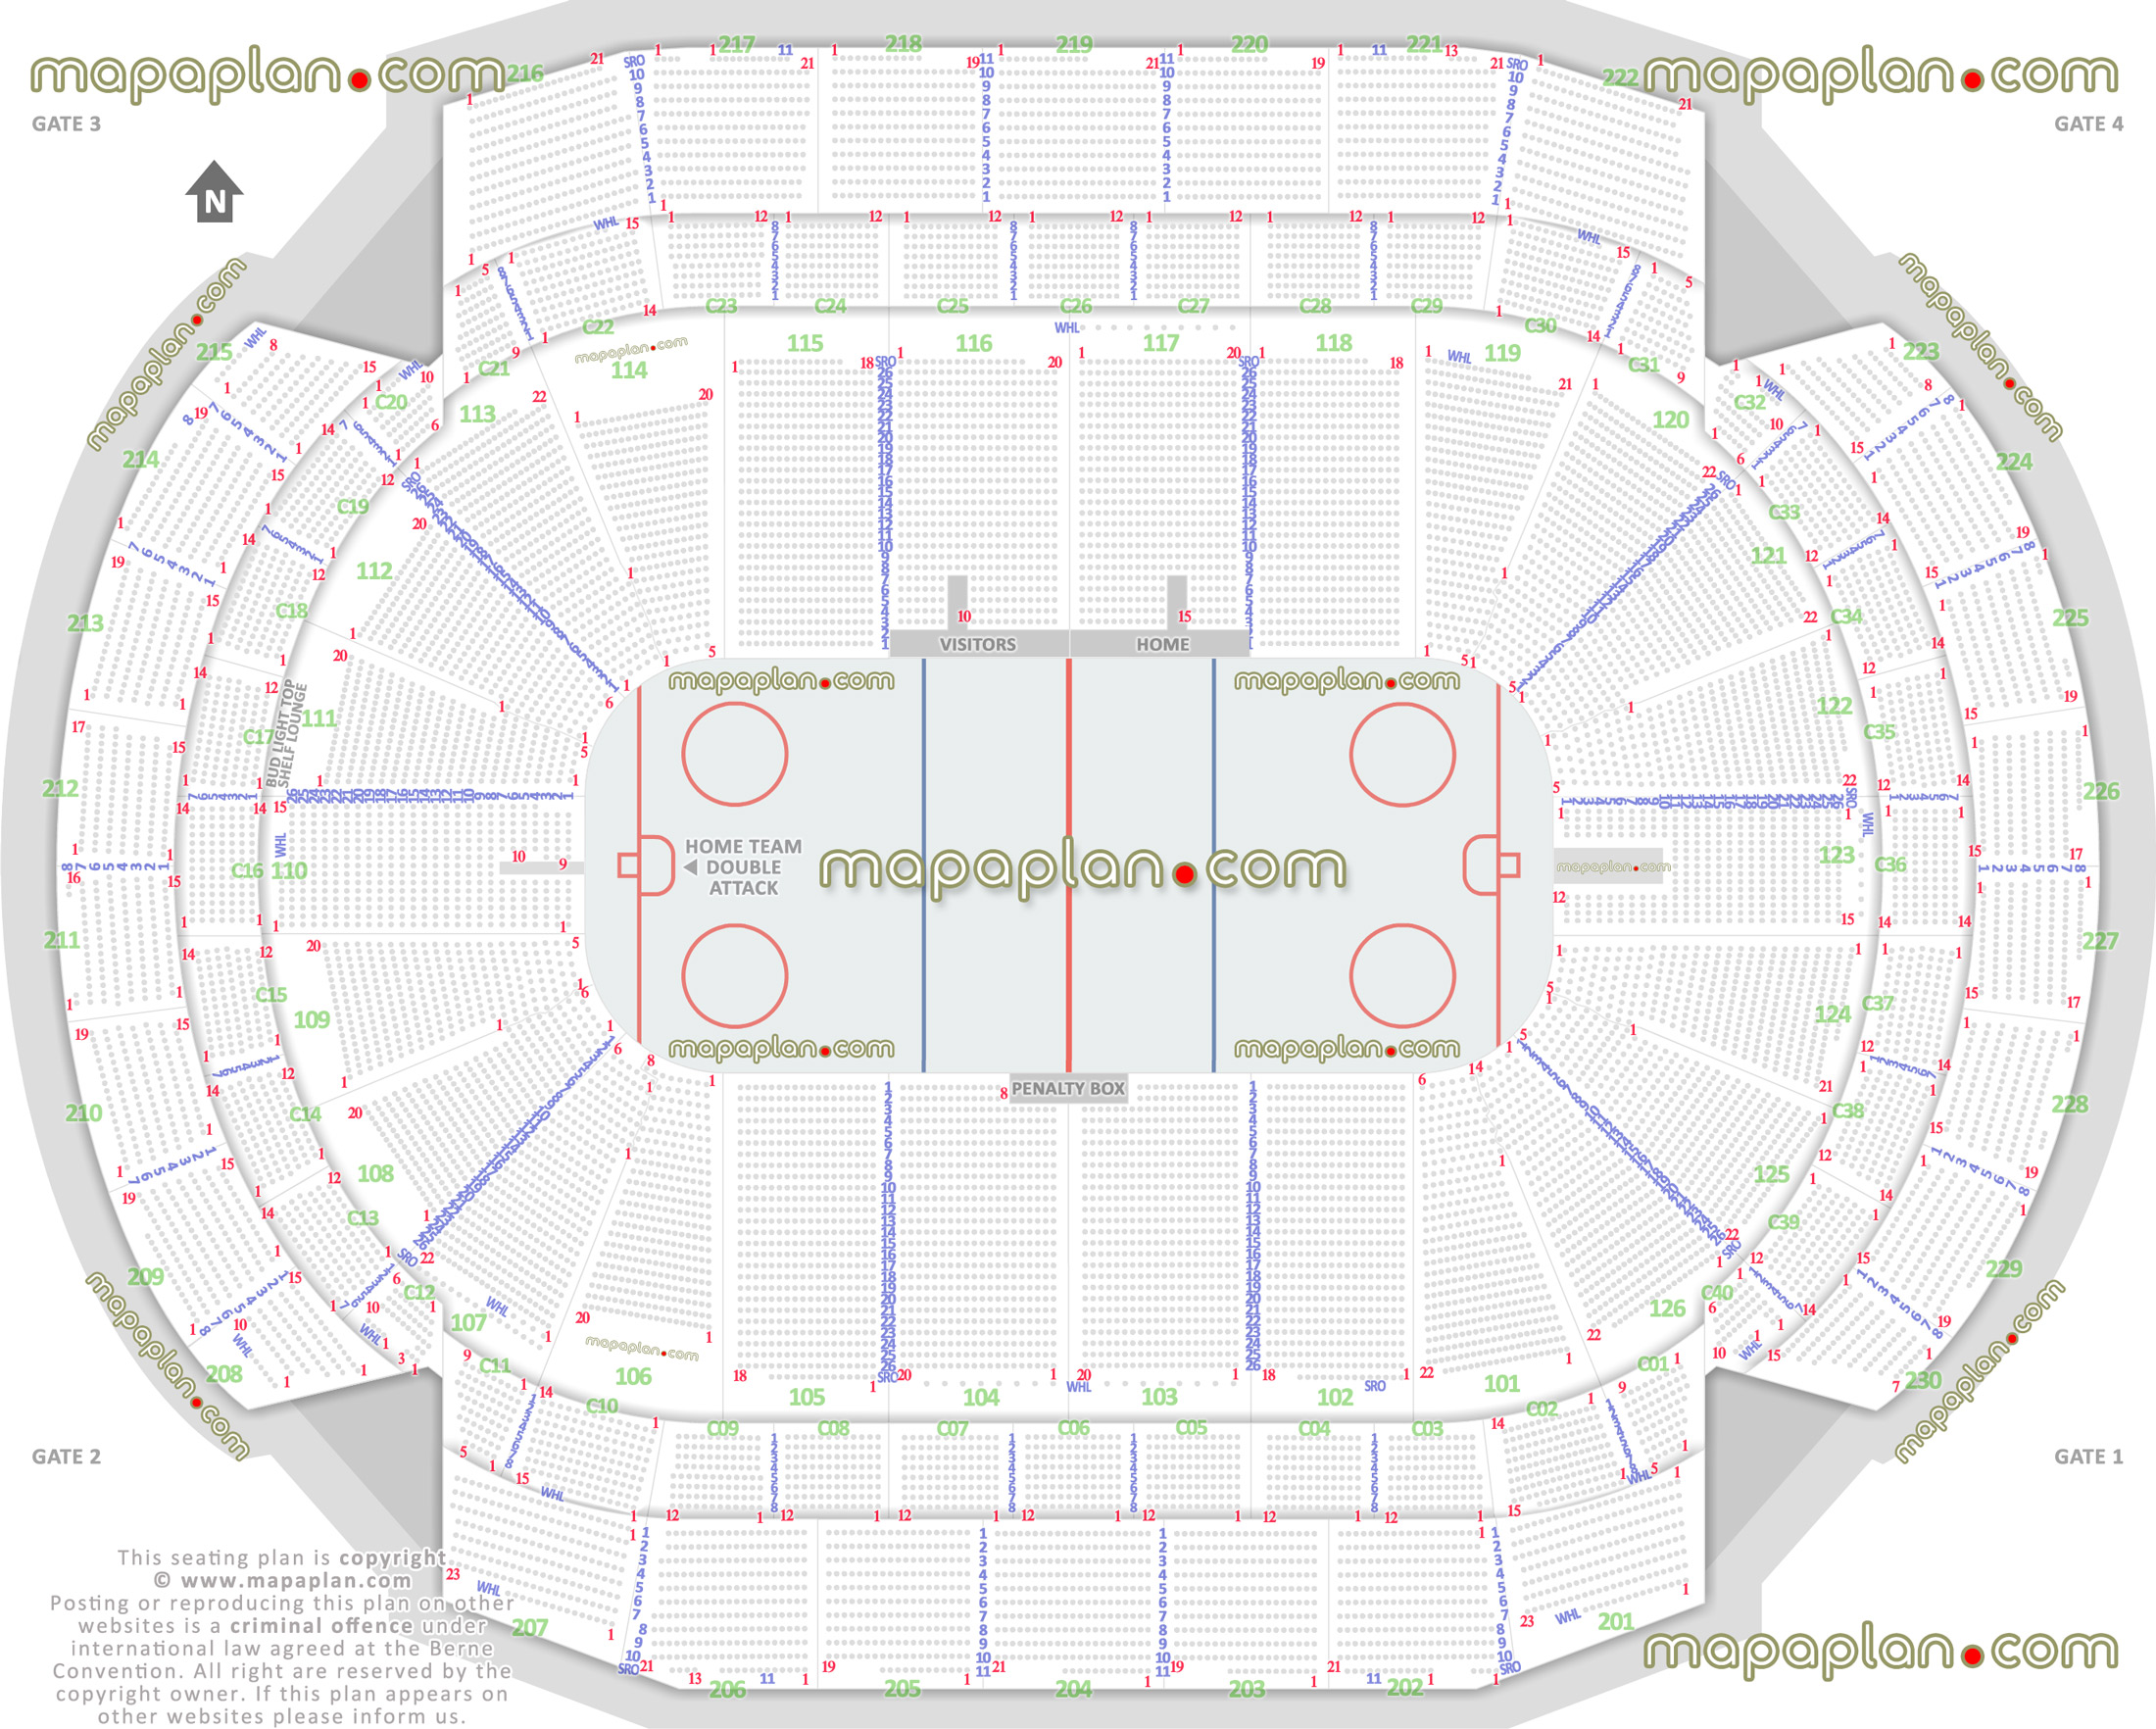 hockey plan minnesota wild nhl ncaa tournament games arena stadium diagram individual find seat locator seats row best seats rows numbered upper club lower level sections 101 102 103 104 105 106 107 108 109 110 111 112 113 114 115 116 117 118 119 120 121 122 123 124 125 126 Saint Paul Xcel Energy Center seating chart